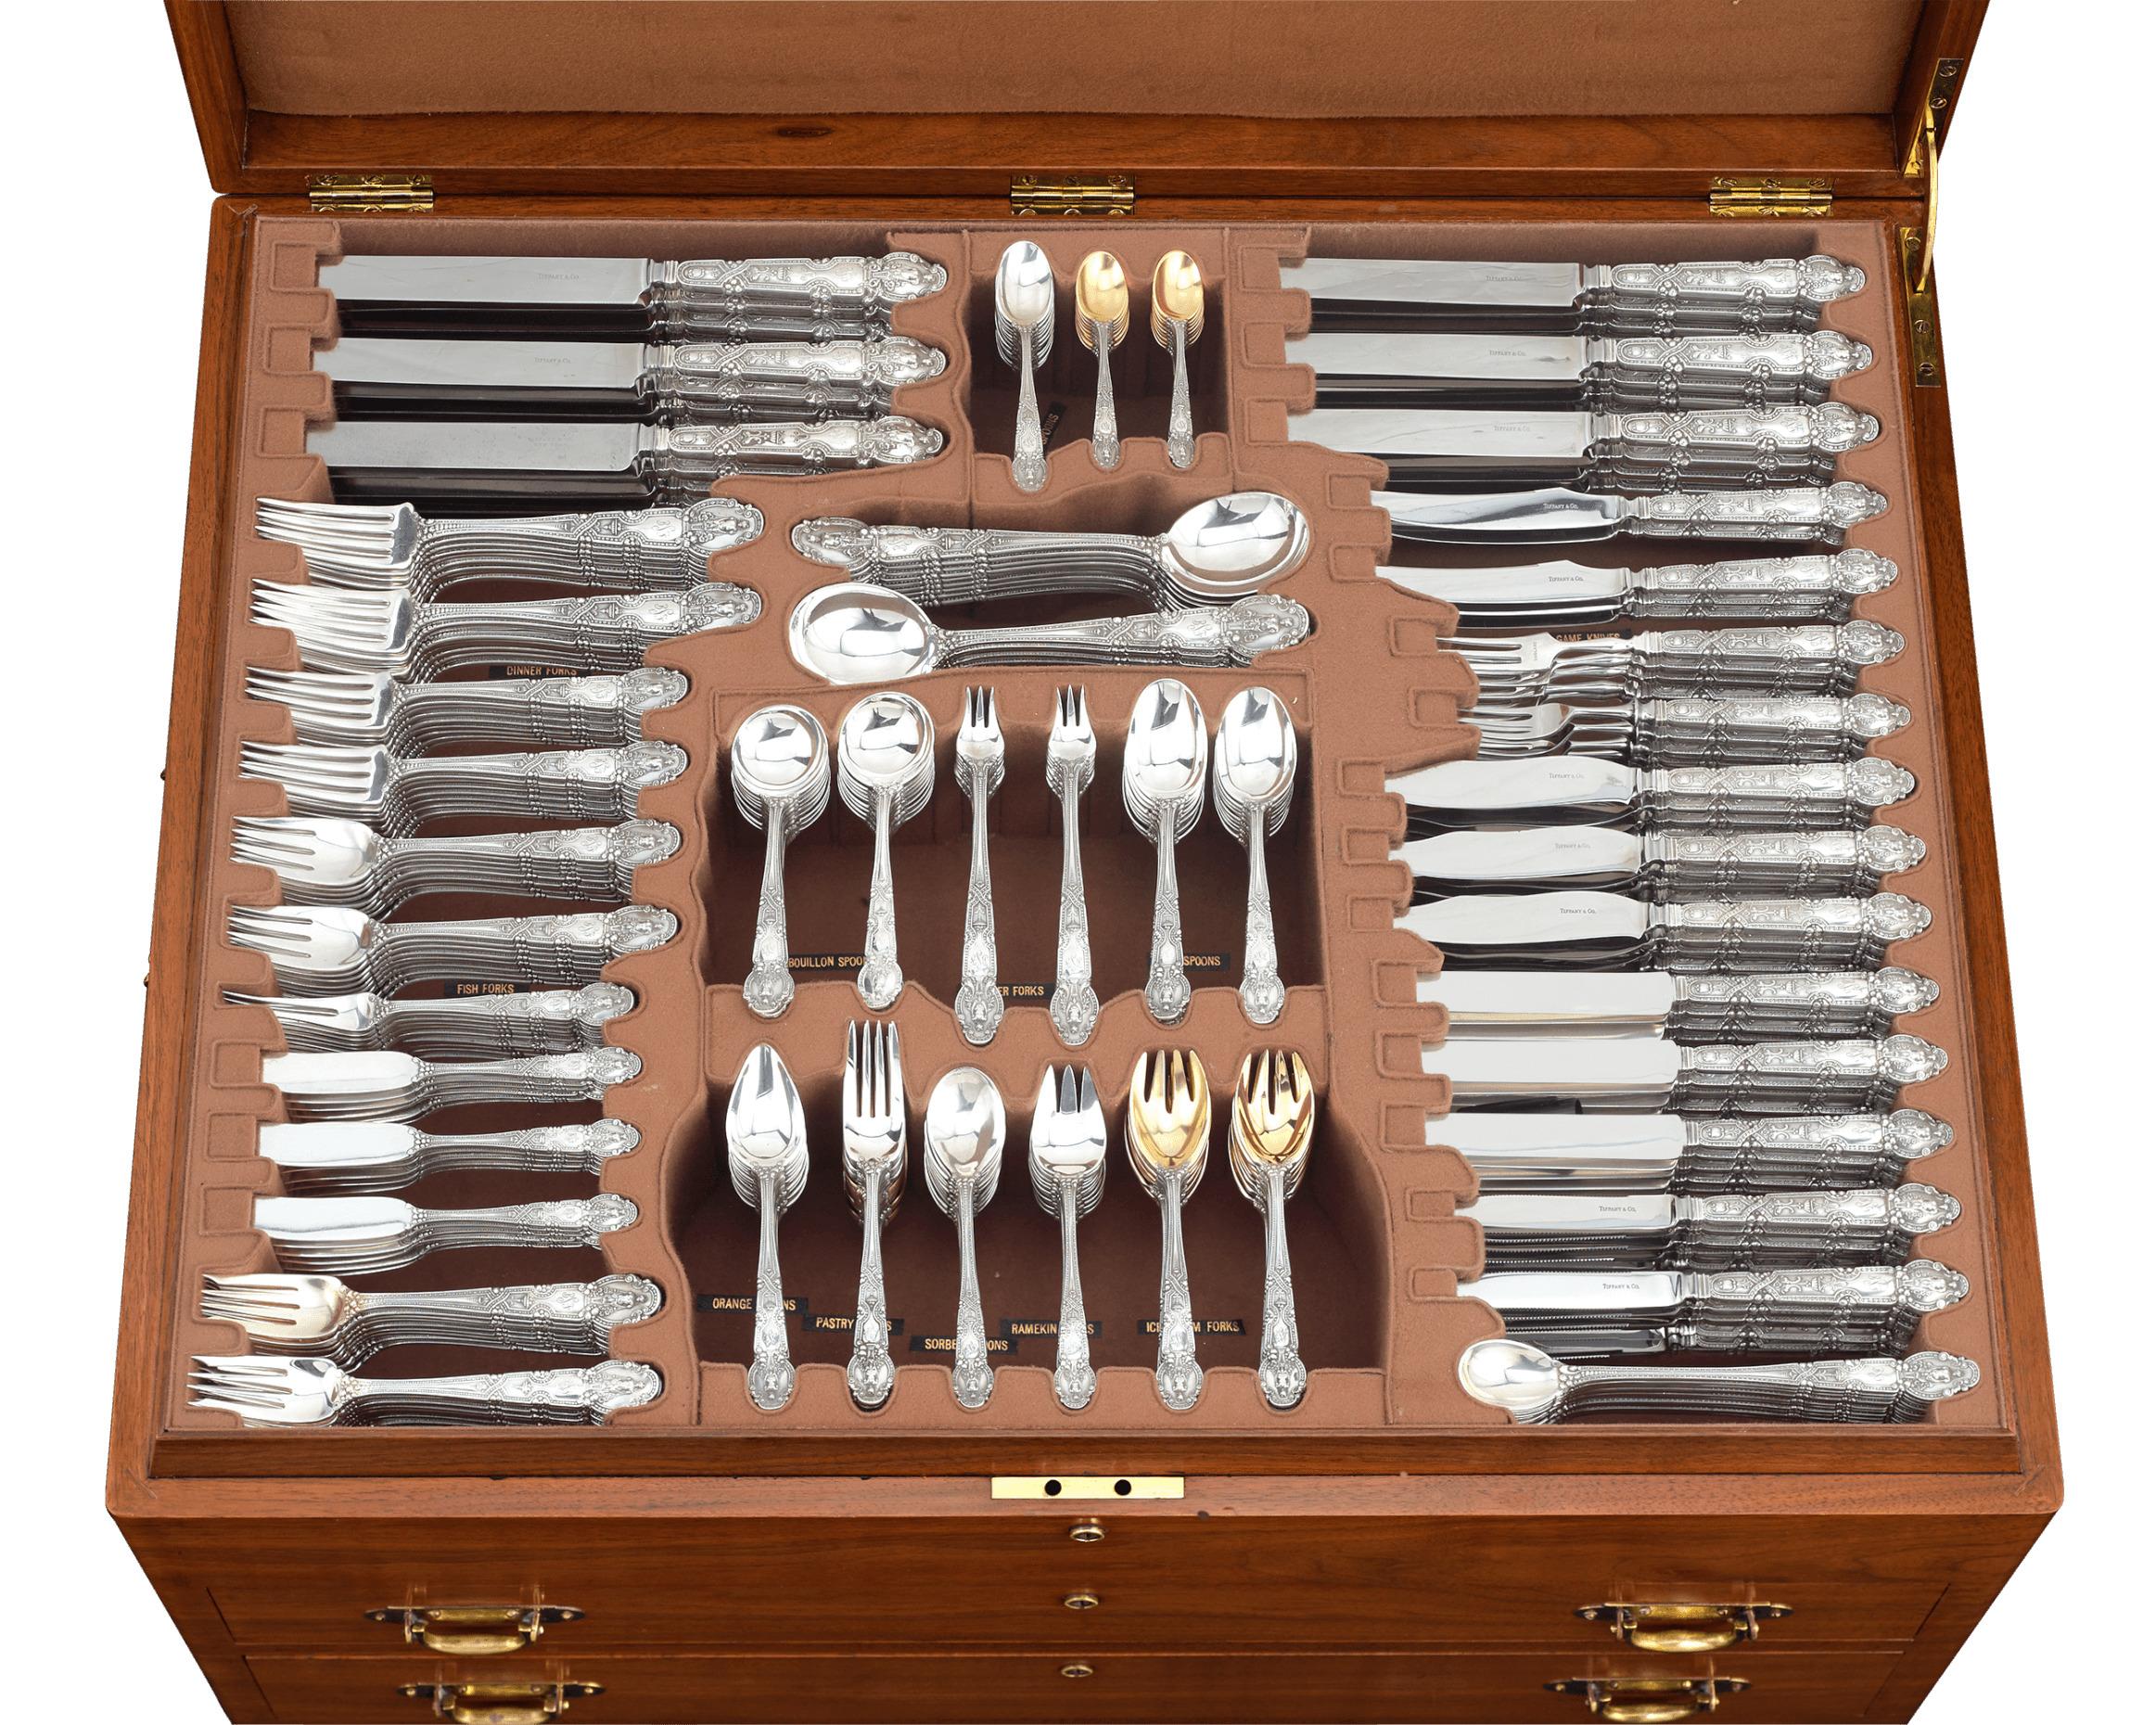 This magnificent and complete, 445-piece Tiffany & Co. silver flatware service for 18 is wrought in the romantic and classical Renaissance pattern. Designed by Tiffany’s master jewelry and silver designer Paulding Farnham and first produced in 1905,